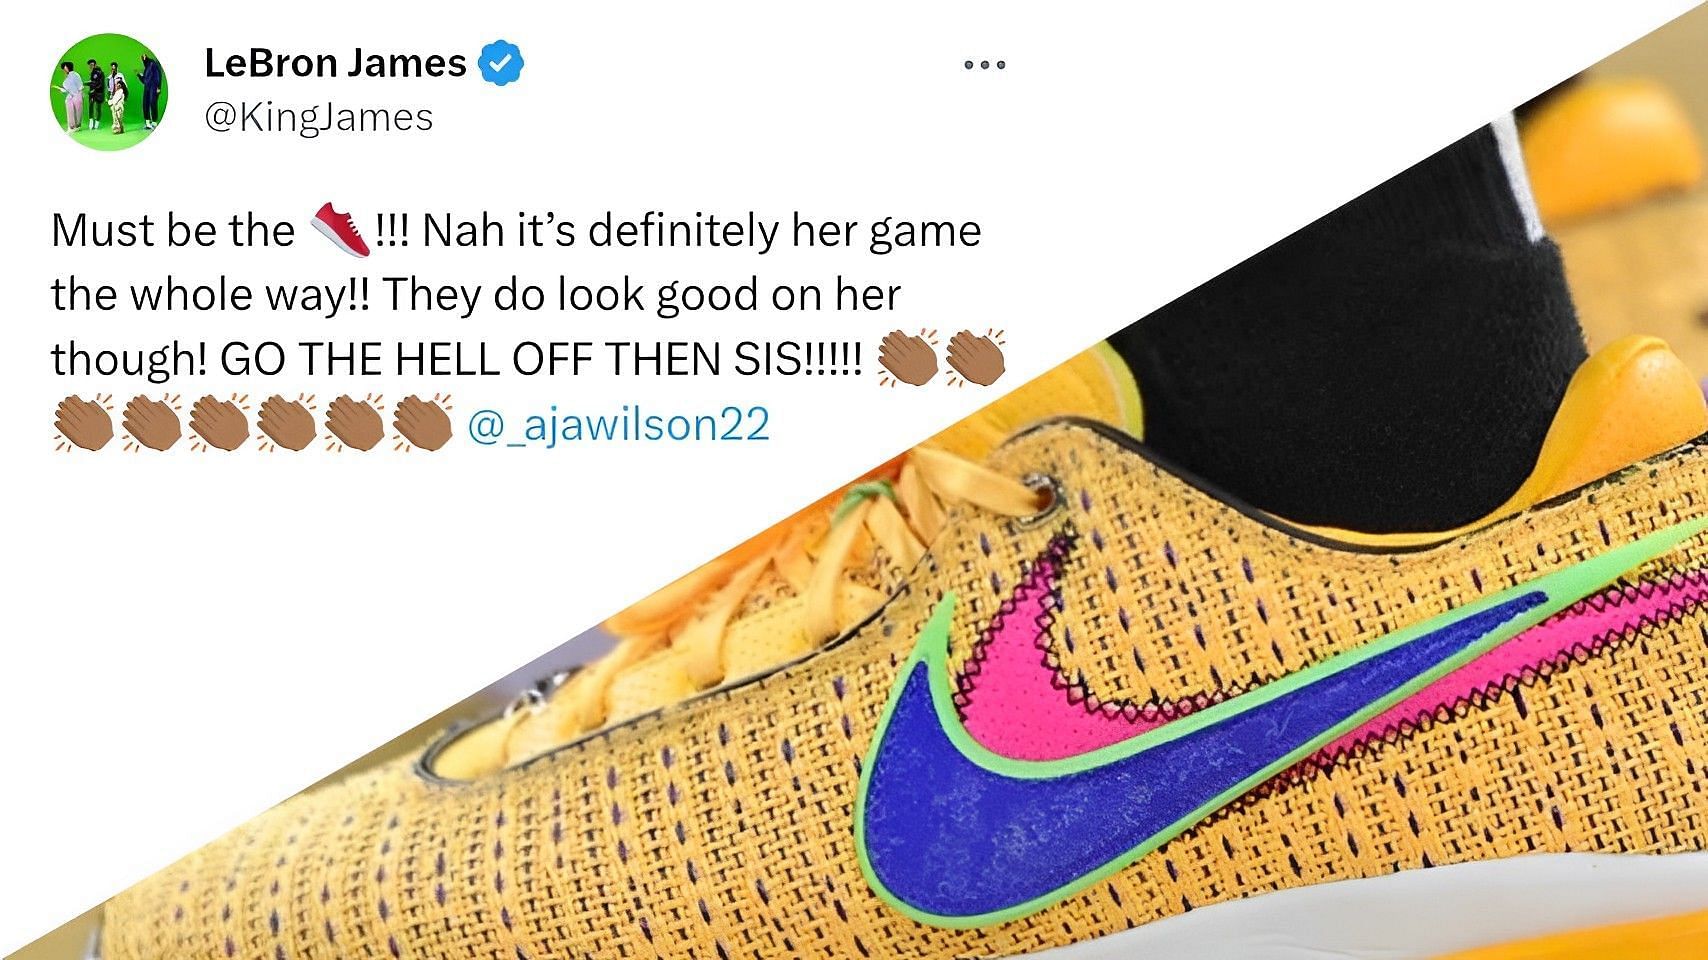 GO THE HELL OFF THEN SIS: LeBron James lauds A'ja Wilson's record